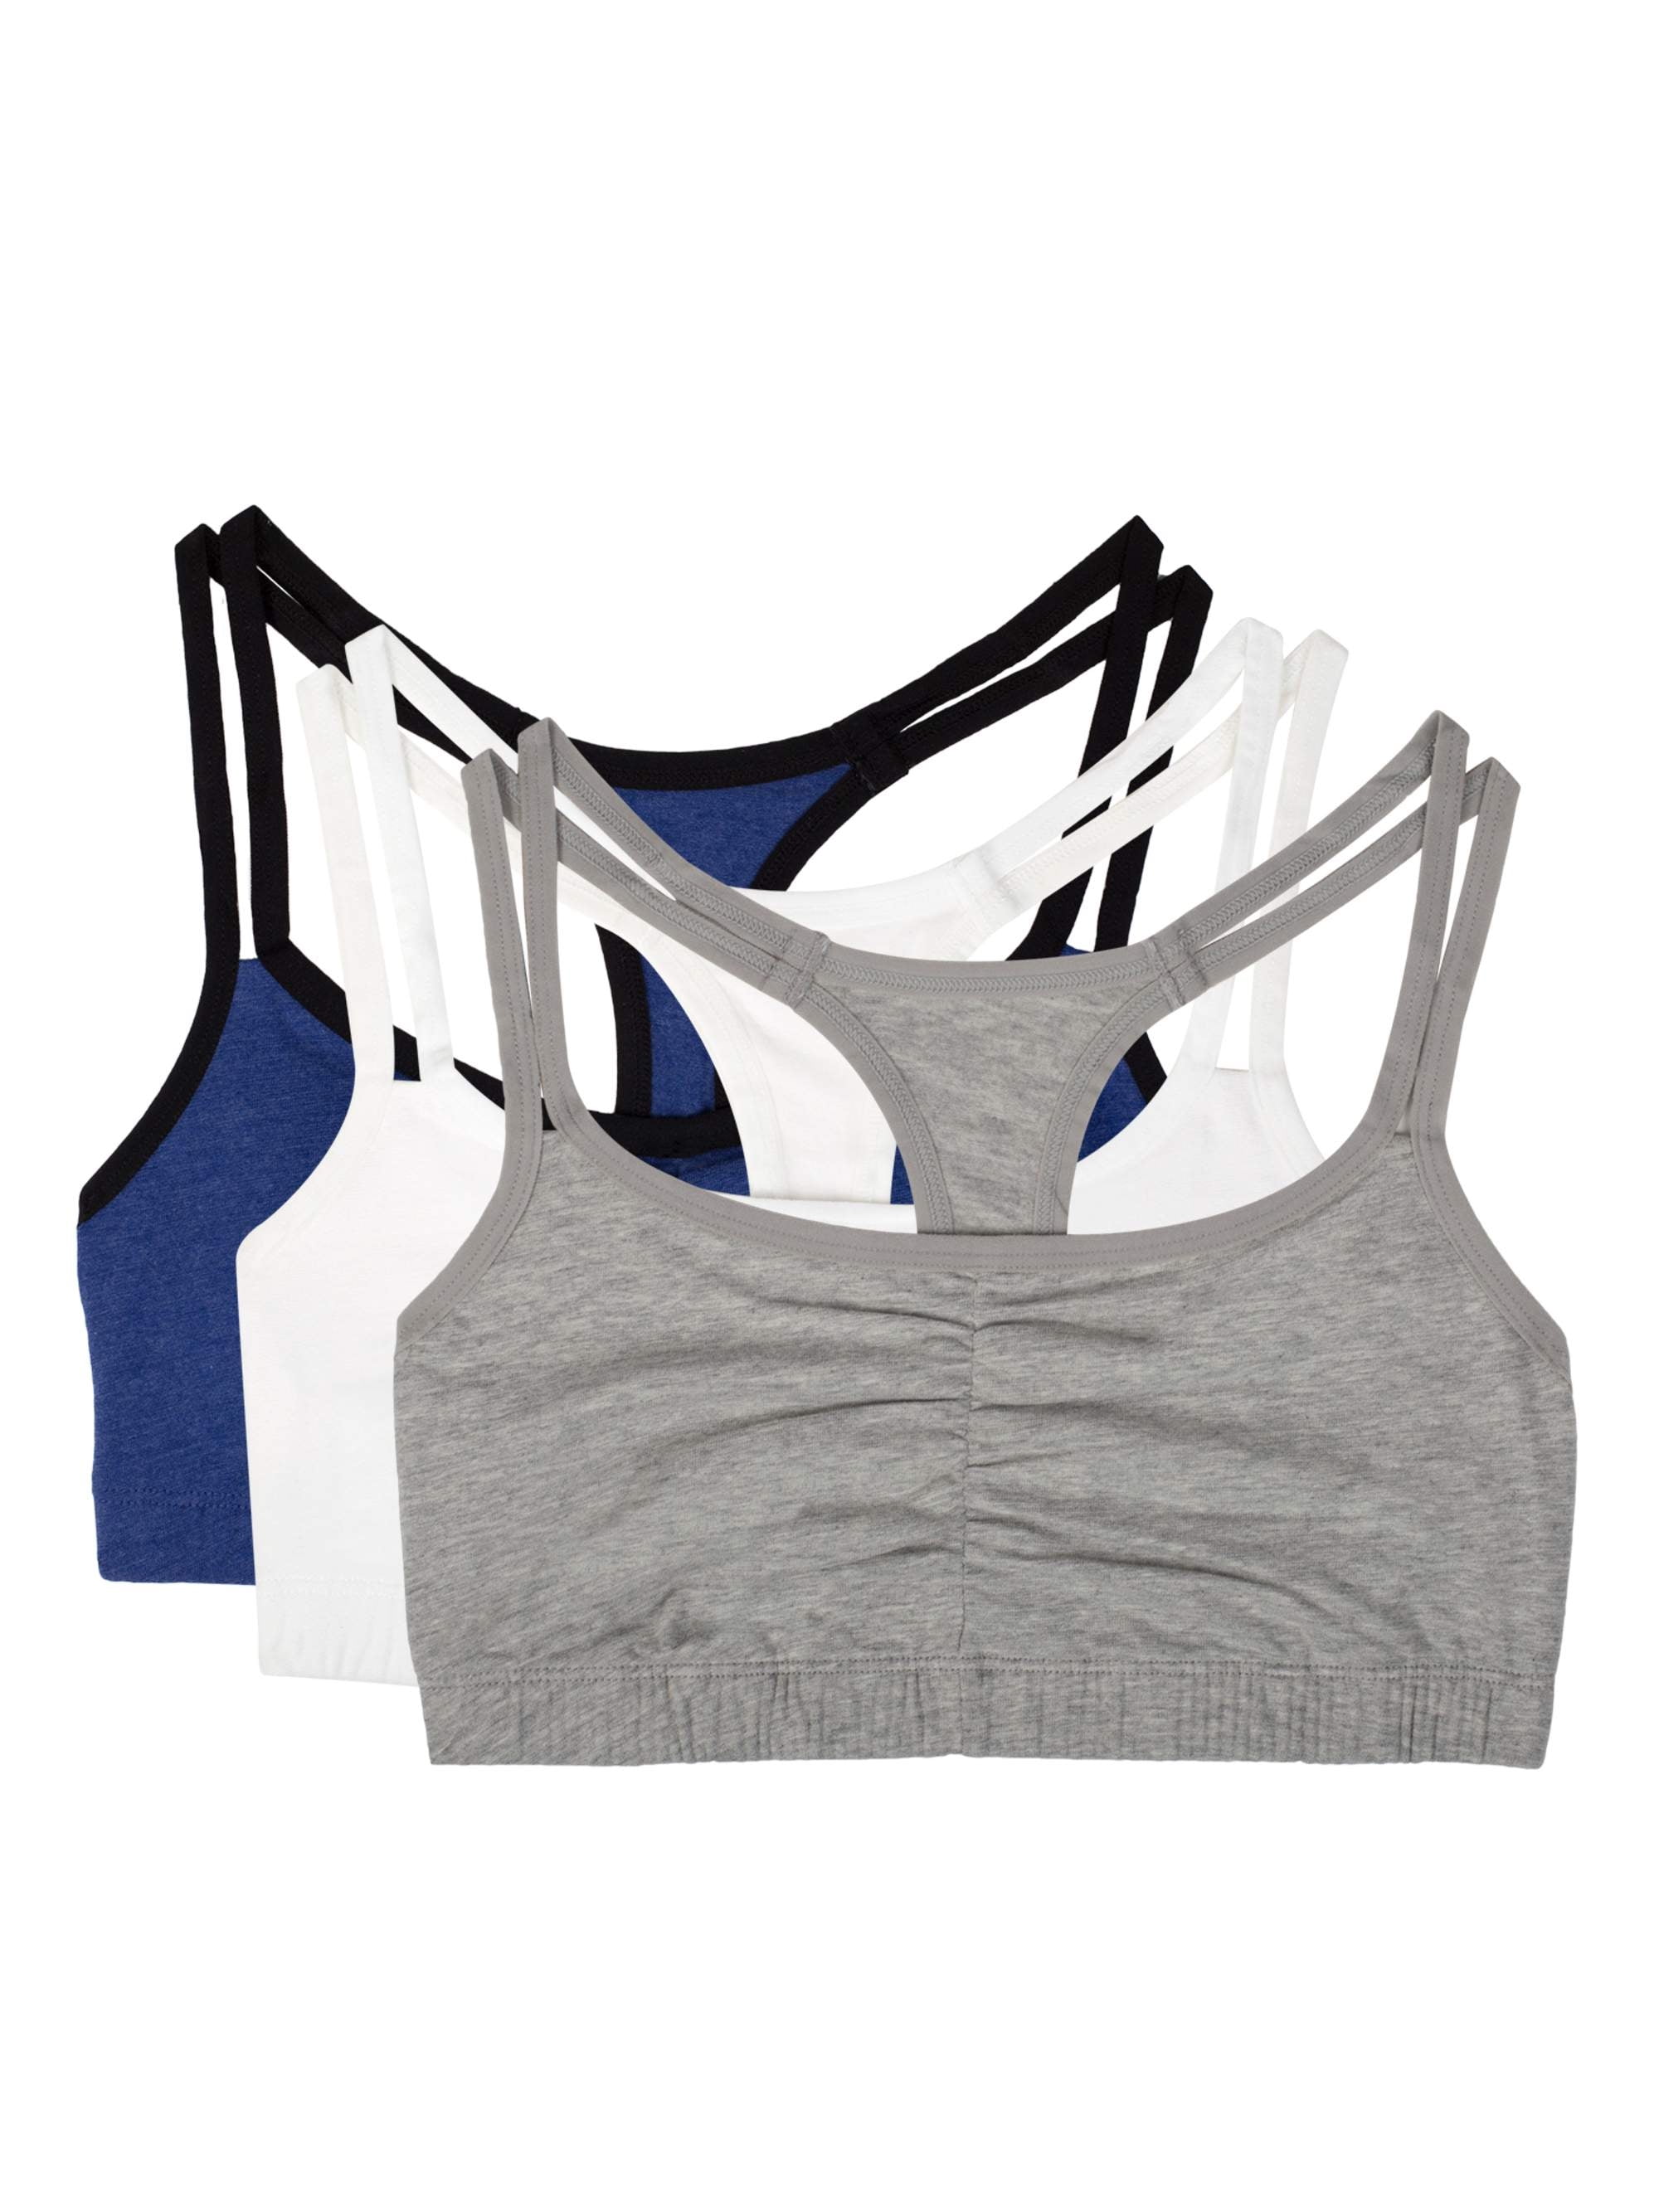  Fruit Of The Loom Womens Spaghetti Strap Cotton Pull Over 3  Pack Sports Bra